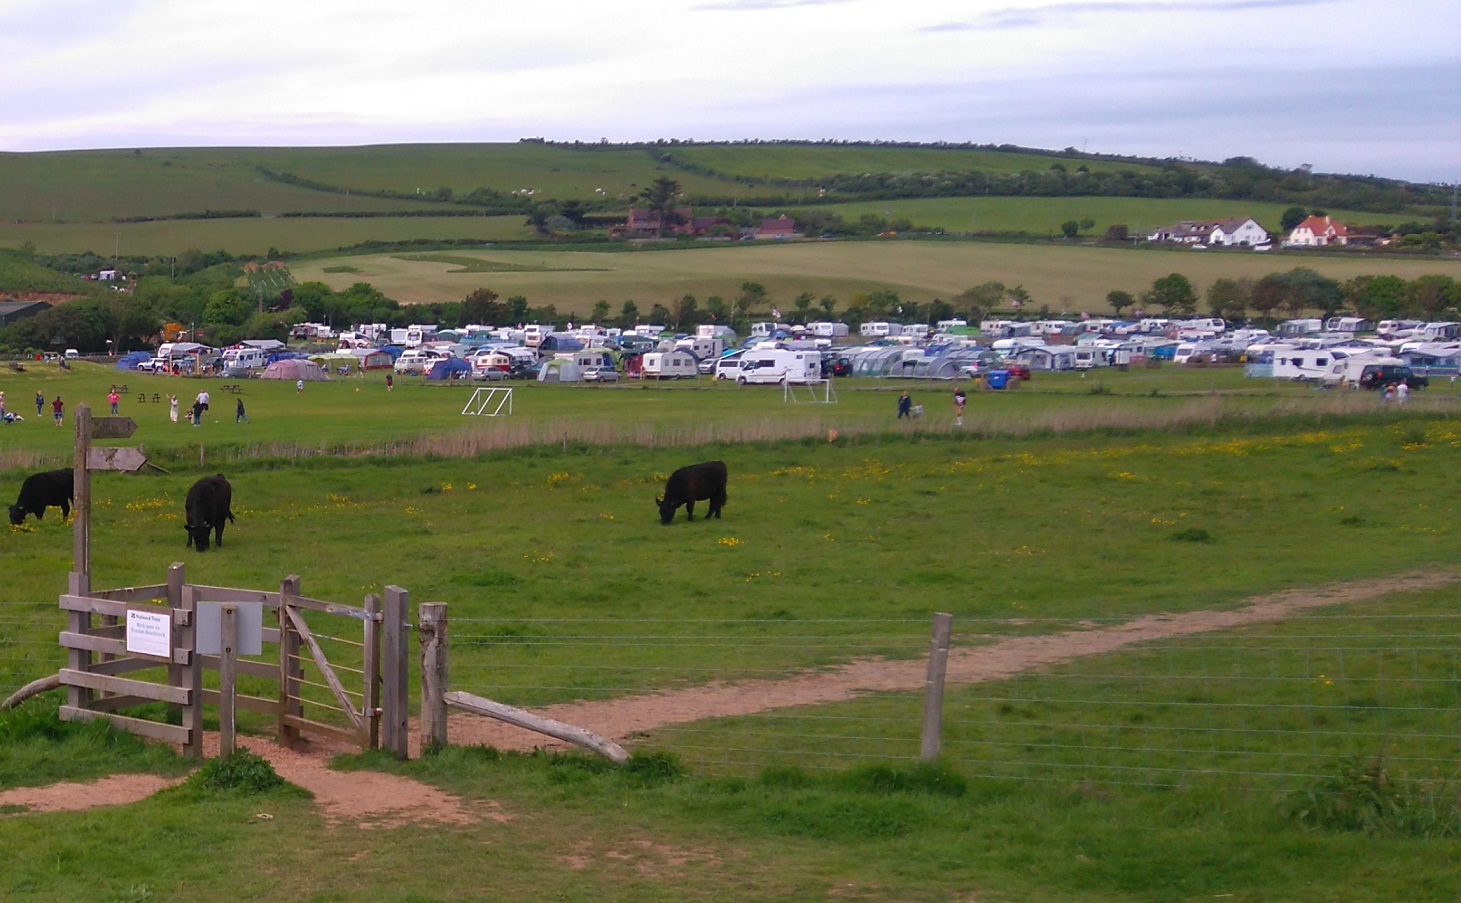 A camping site and caravan park at Burton Bradstock in Dorset viewed across rural meadows in a dull summer day. Hills and fields are visible in the background.